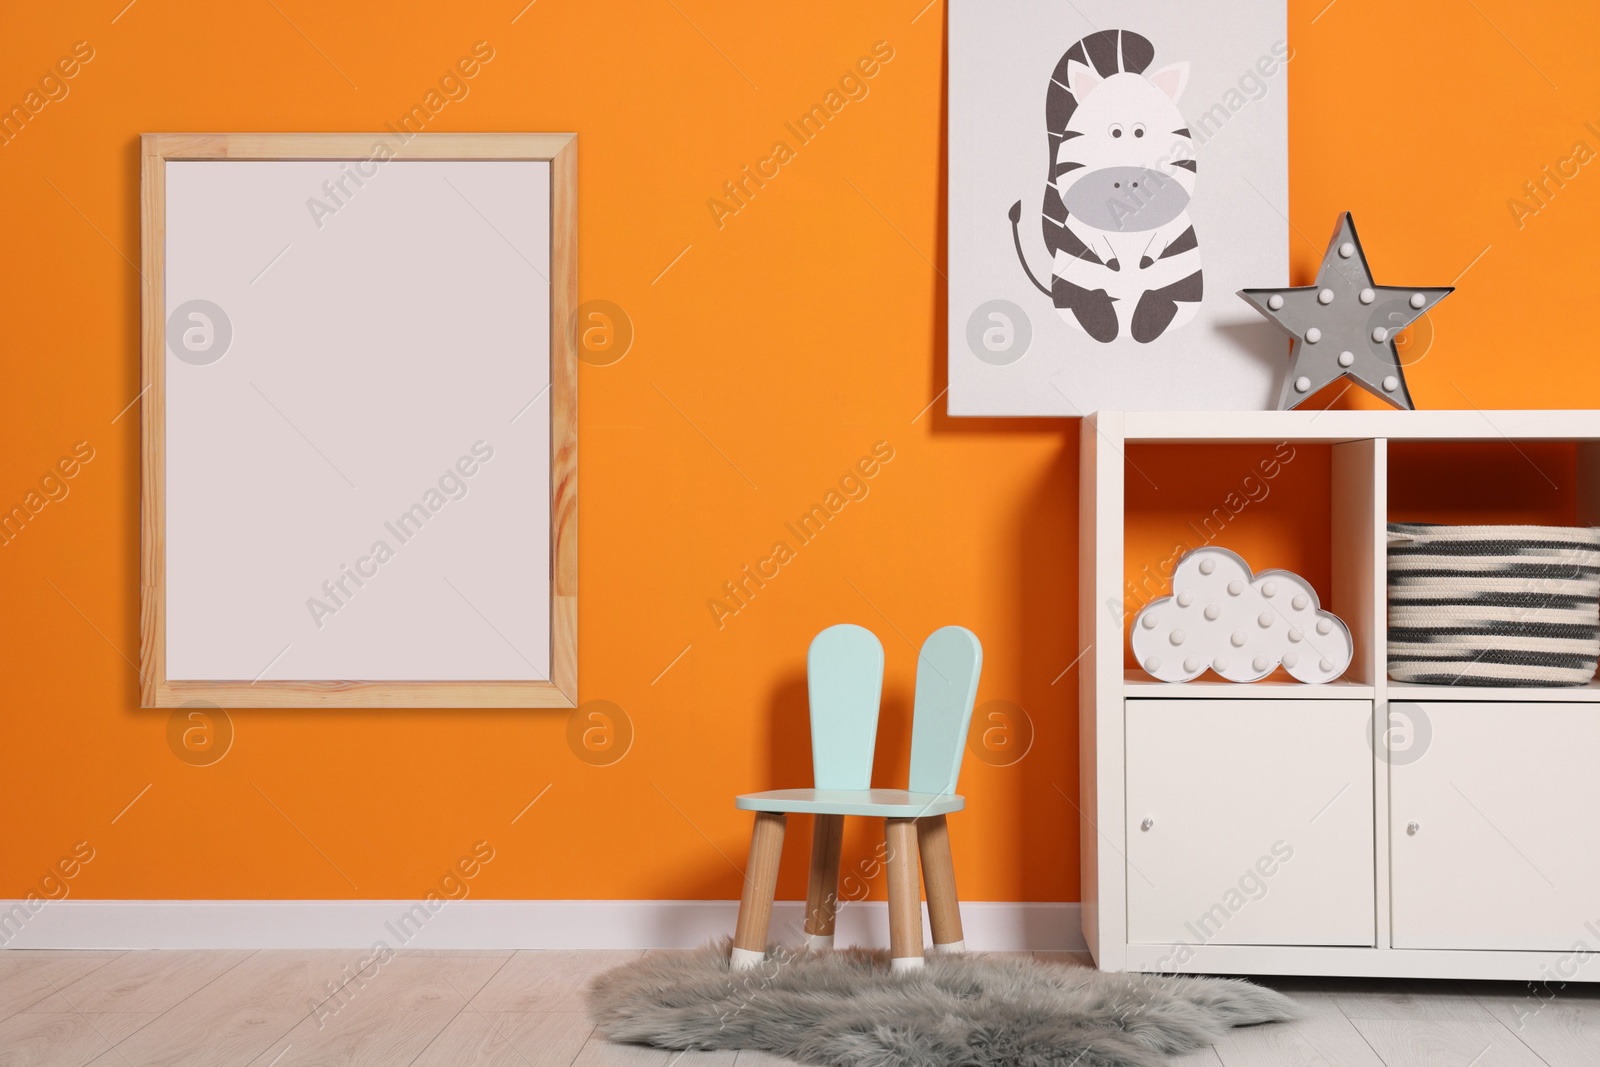 Image of Room for child with empty picture frame on orange wall. Interior design